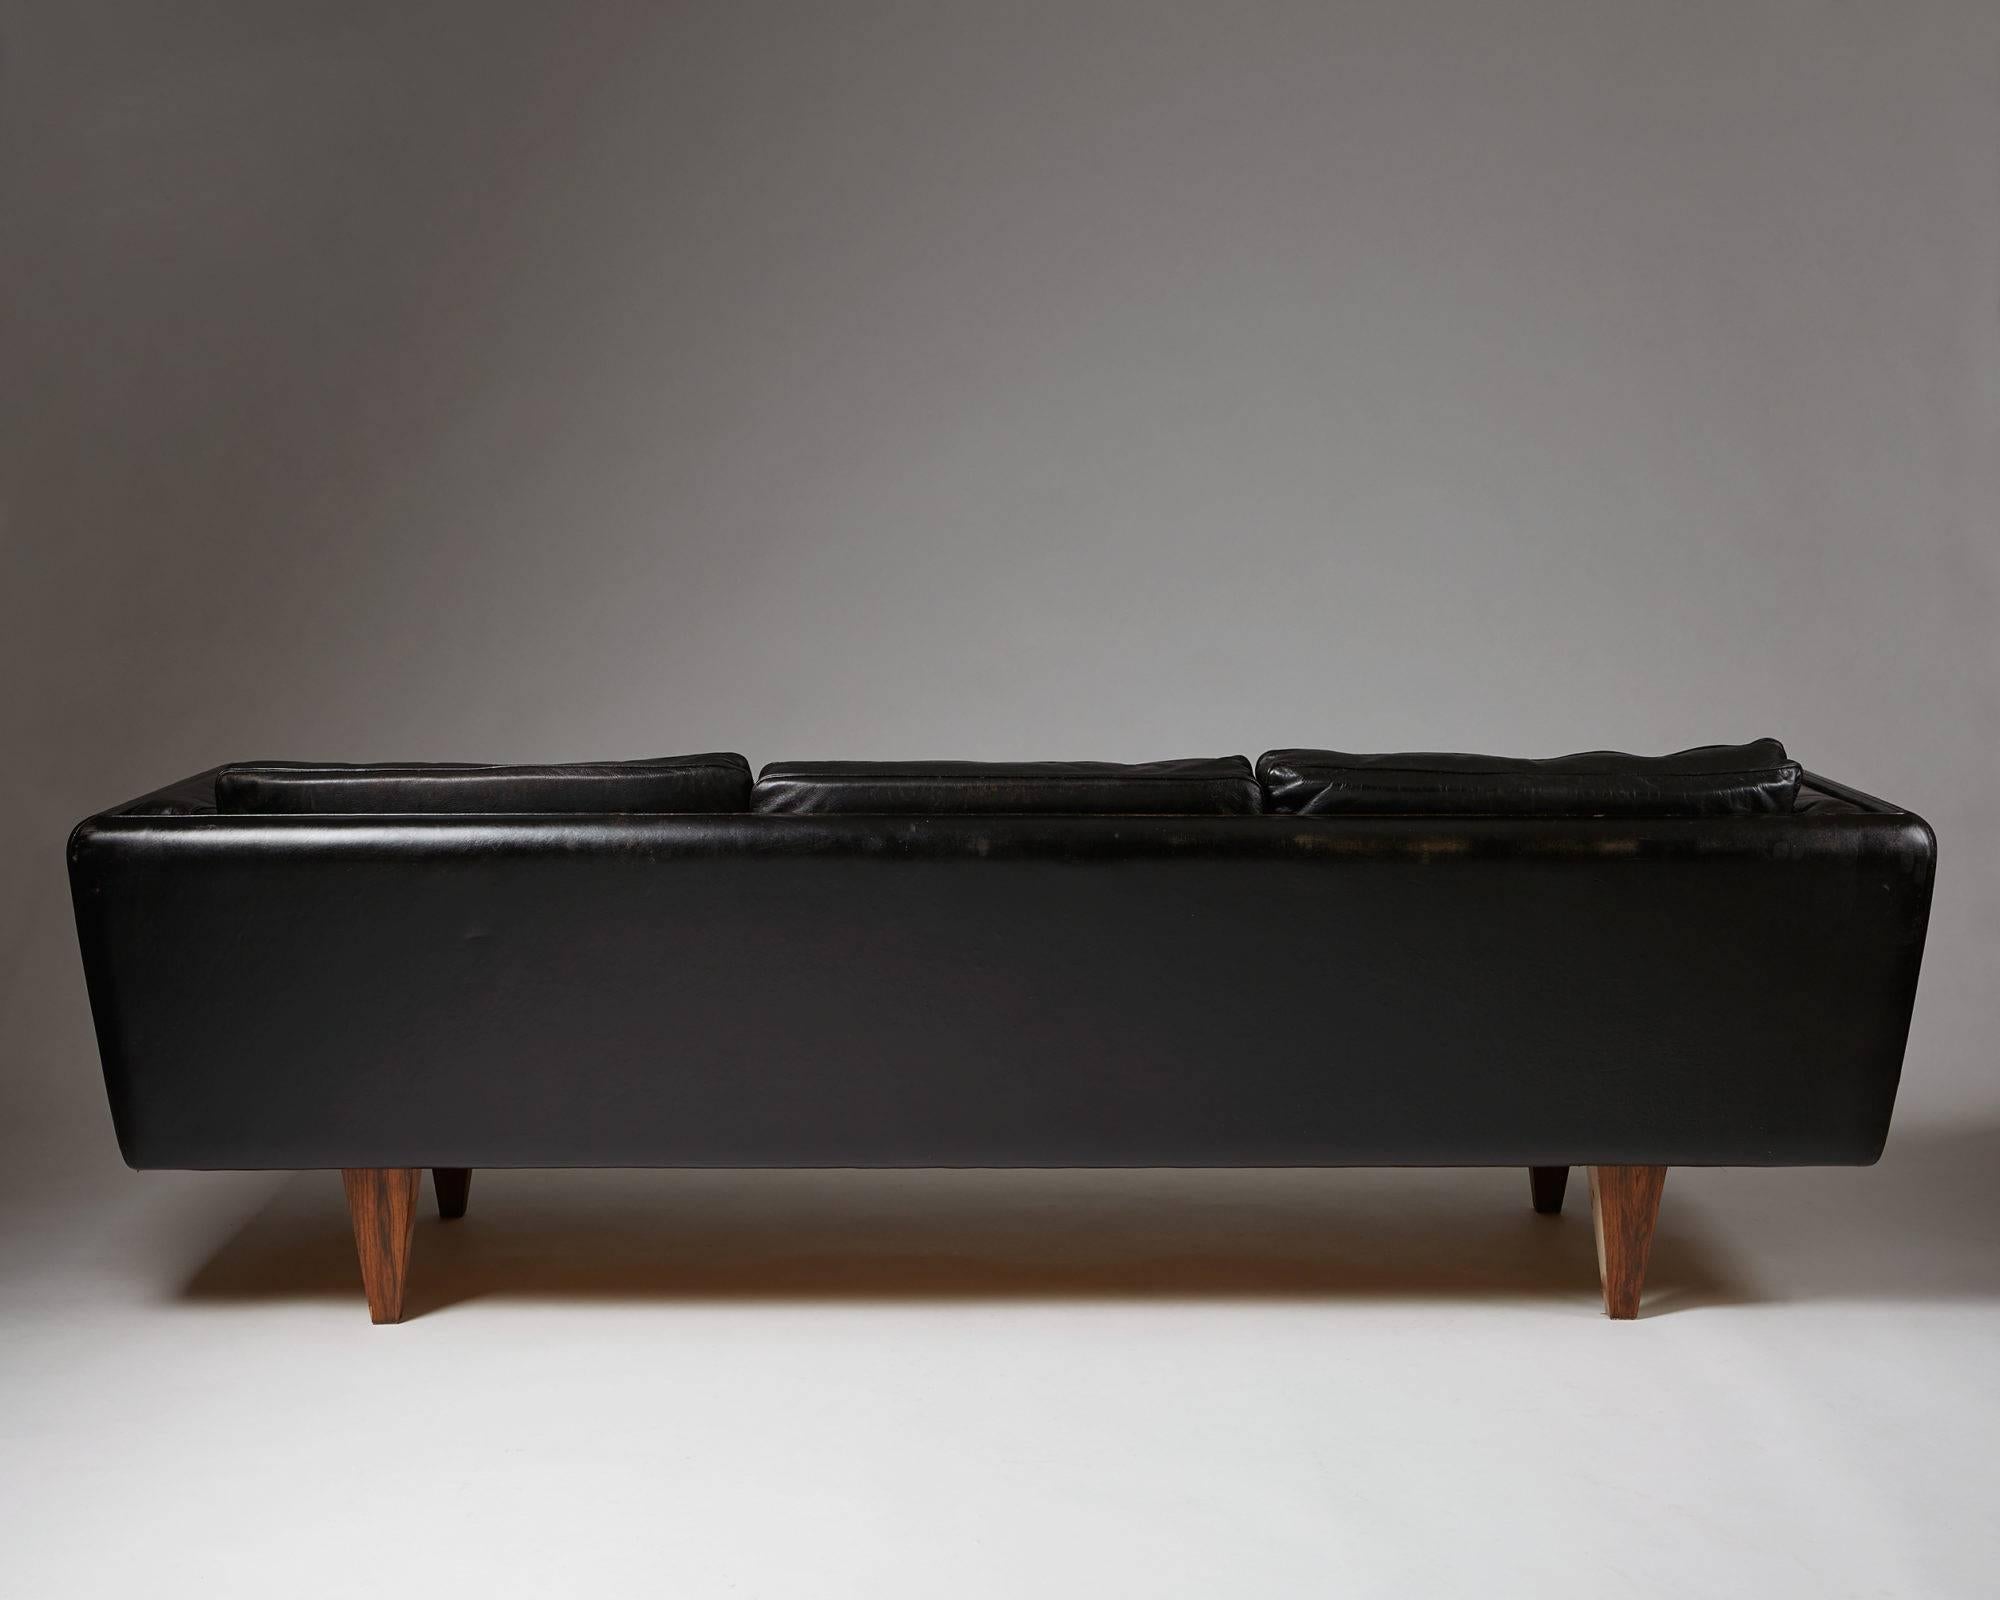 Three-seat sofa designed by Illum Wikkelsø, Denmark, 1960s.
Rosewood and leather.